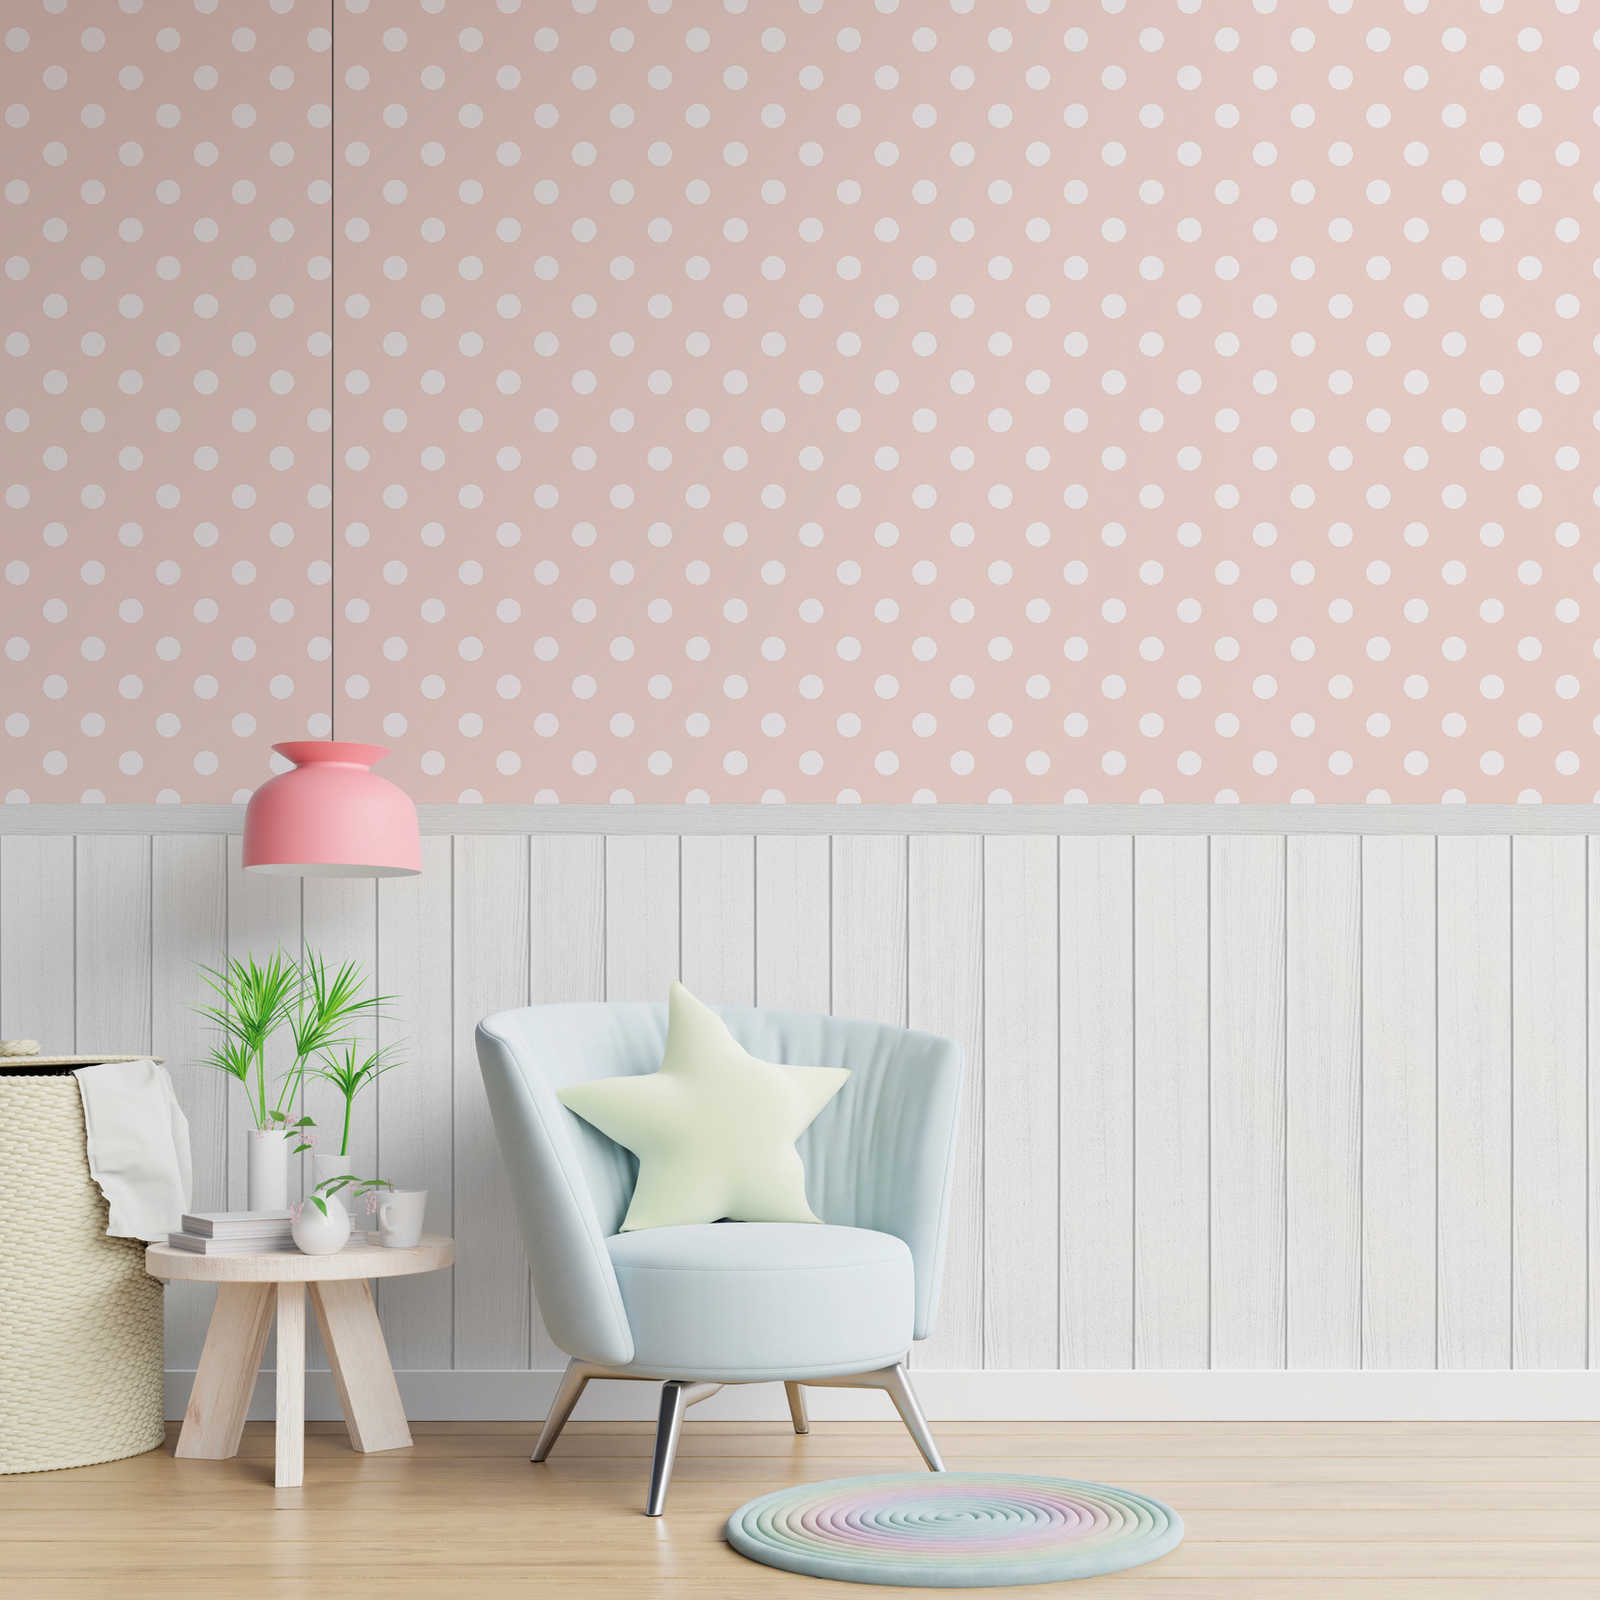 Non-woven motif wallpaper with wood-effect plinth border and dot pattern - white, grey, pink
